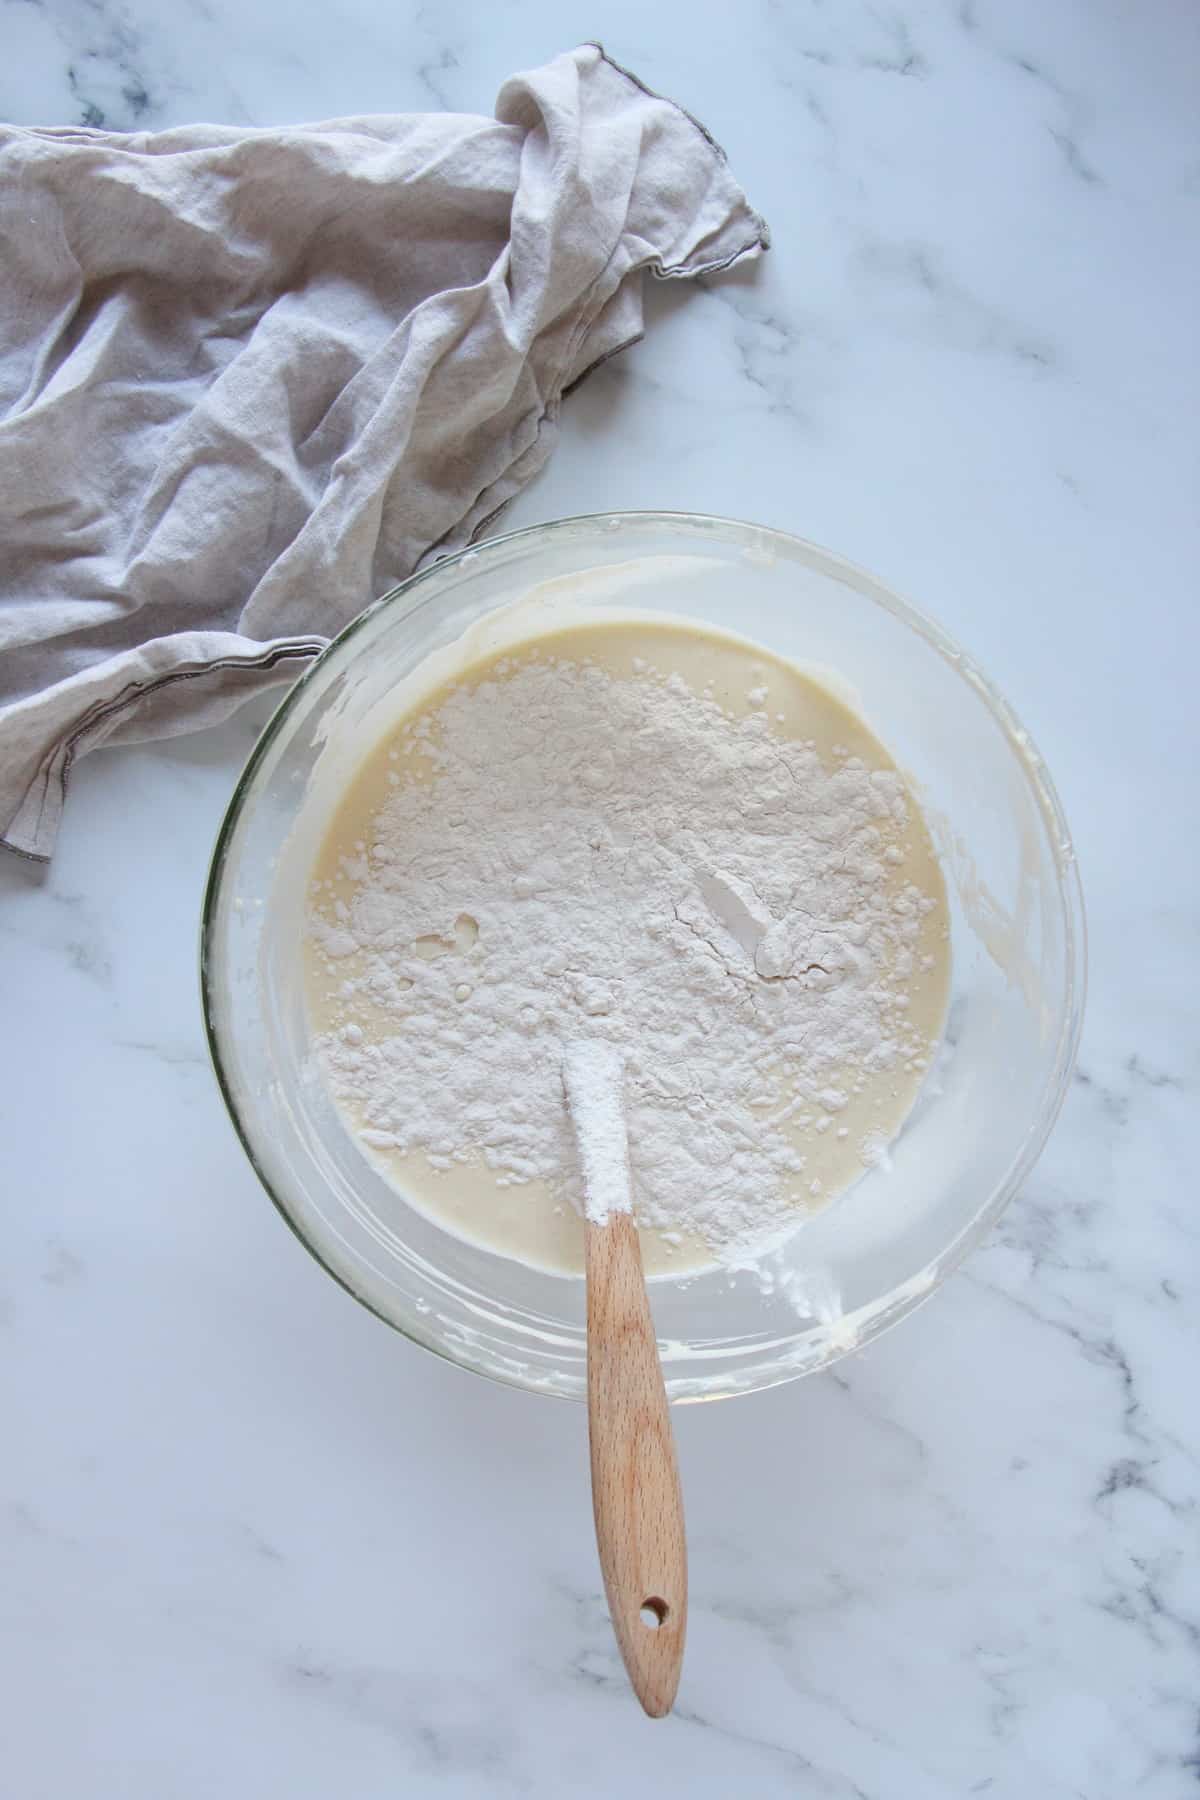 sifting flour into cheesecake